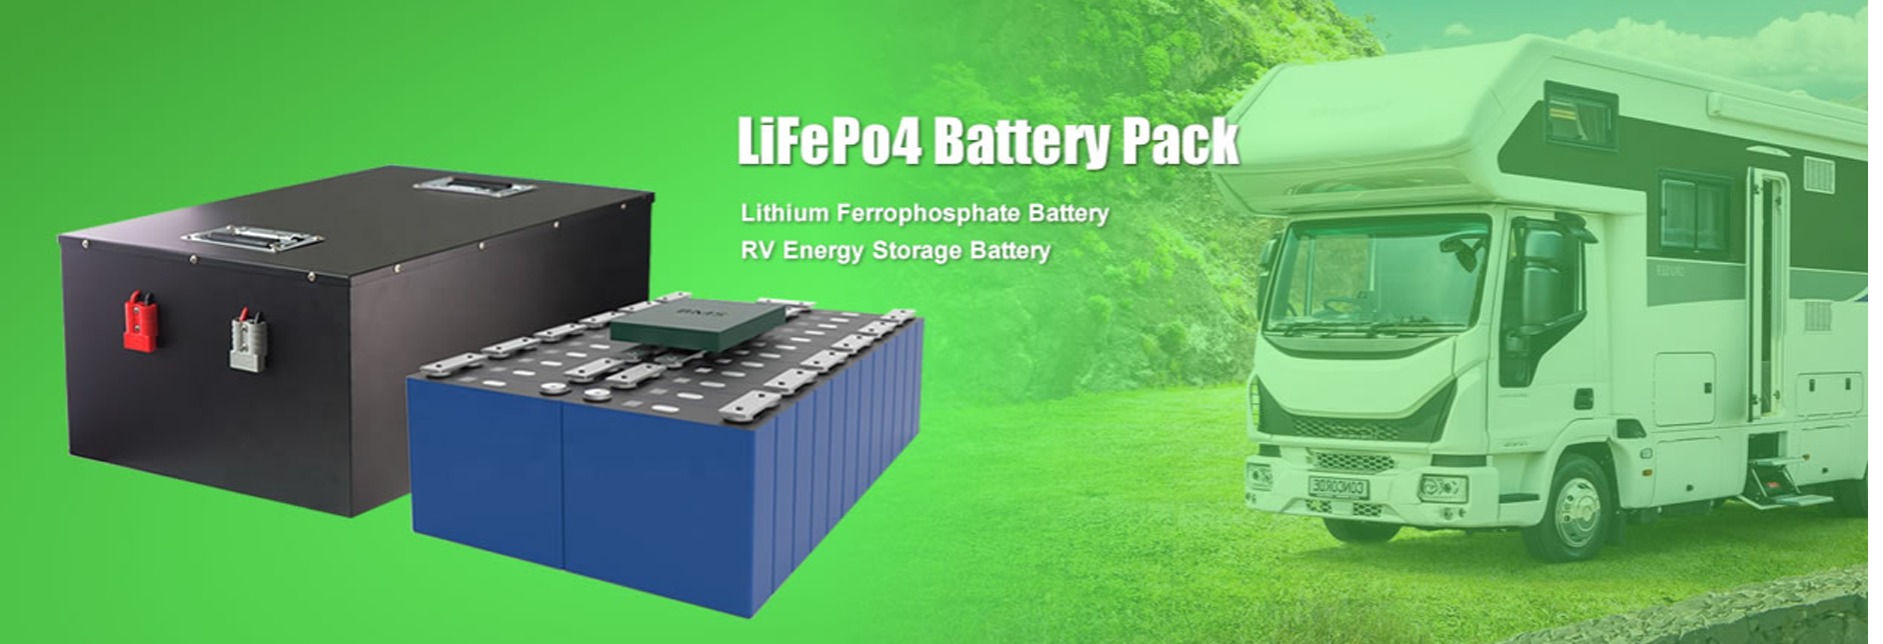 LiFePo4 Battery Pack